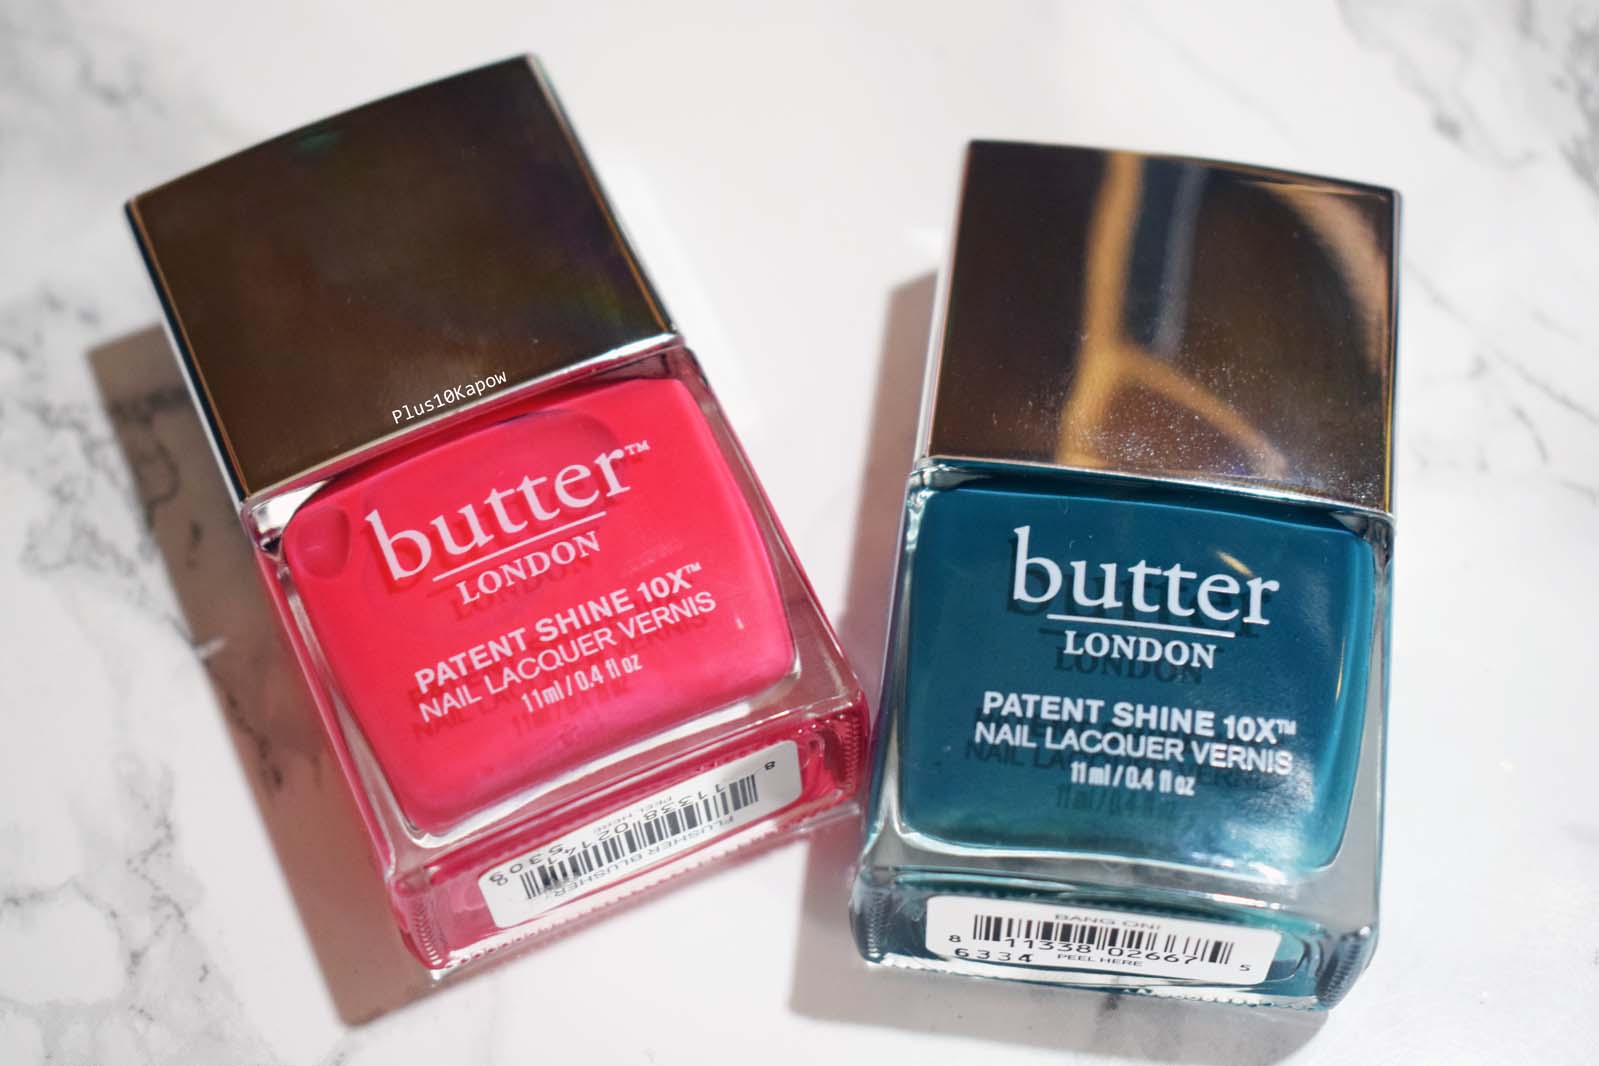 7. Butter London Patent Shine 10X Nail Lacquer in "Ruby Murray" - wide 8